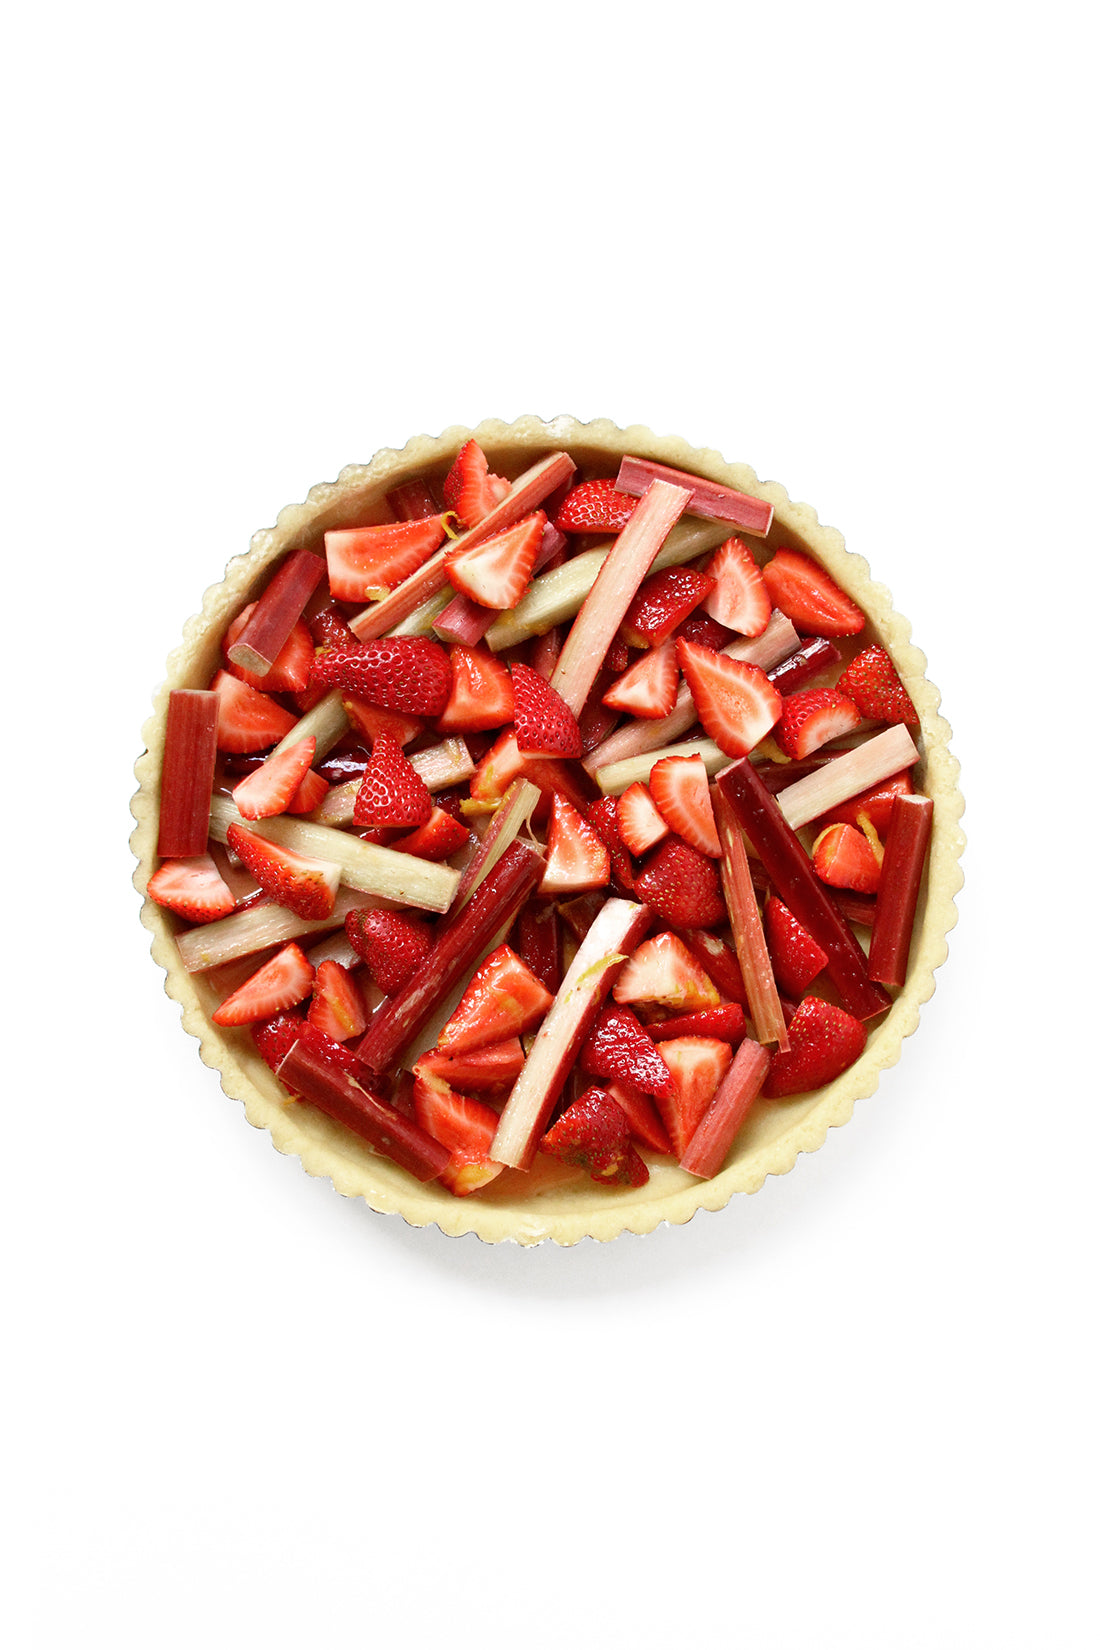 Image from above of an uncooked Miss Jones Baking Co Summer Strawberry + Rhubarb Tart